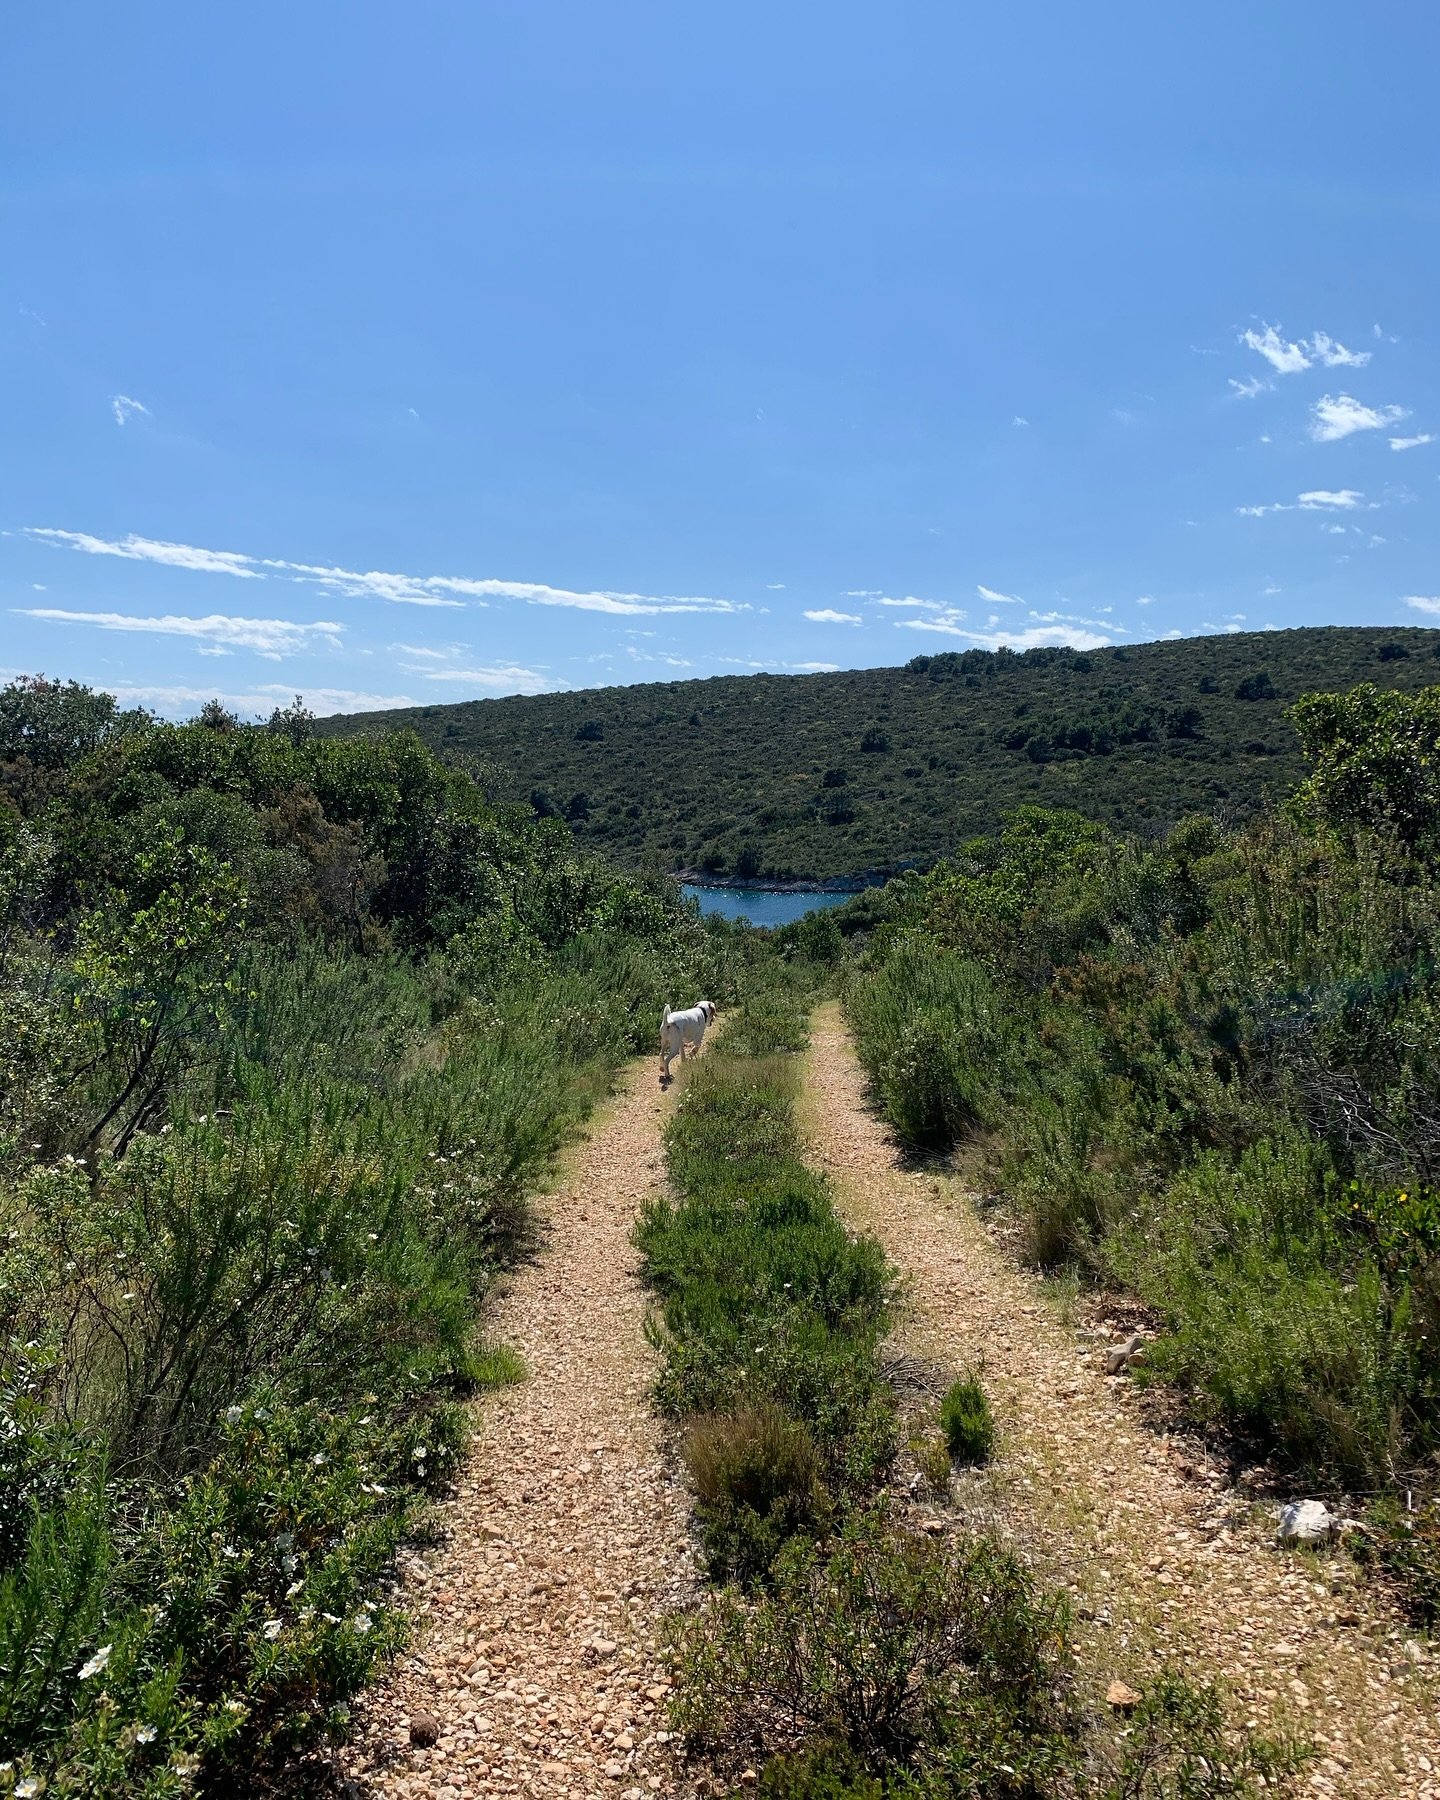 Running at Solta is just a little bit more fun. 

Trails will take you to the sea, alongside olive groves and through the pine wood forest. 

And back at Gone you can always finish the tour with a nice and refreshing plunge in the sea.

#gonesolta
#r